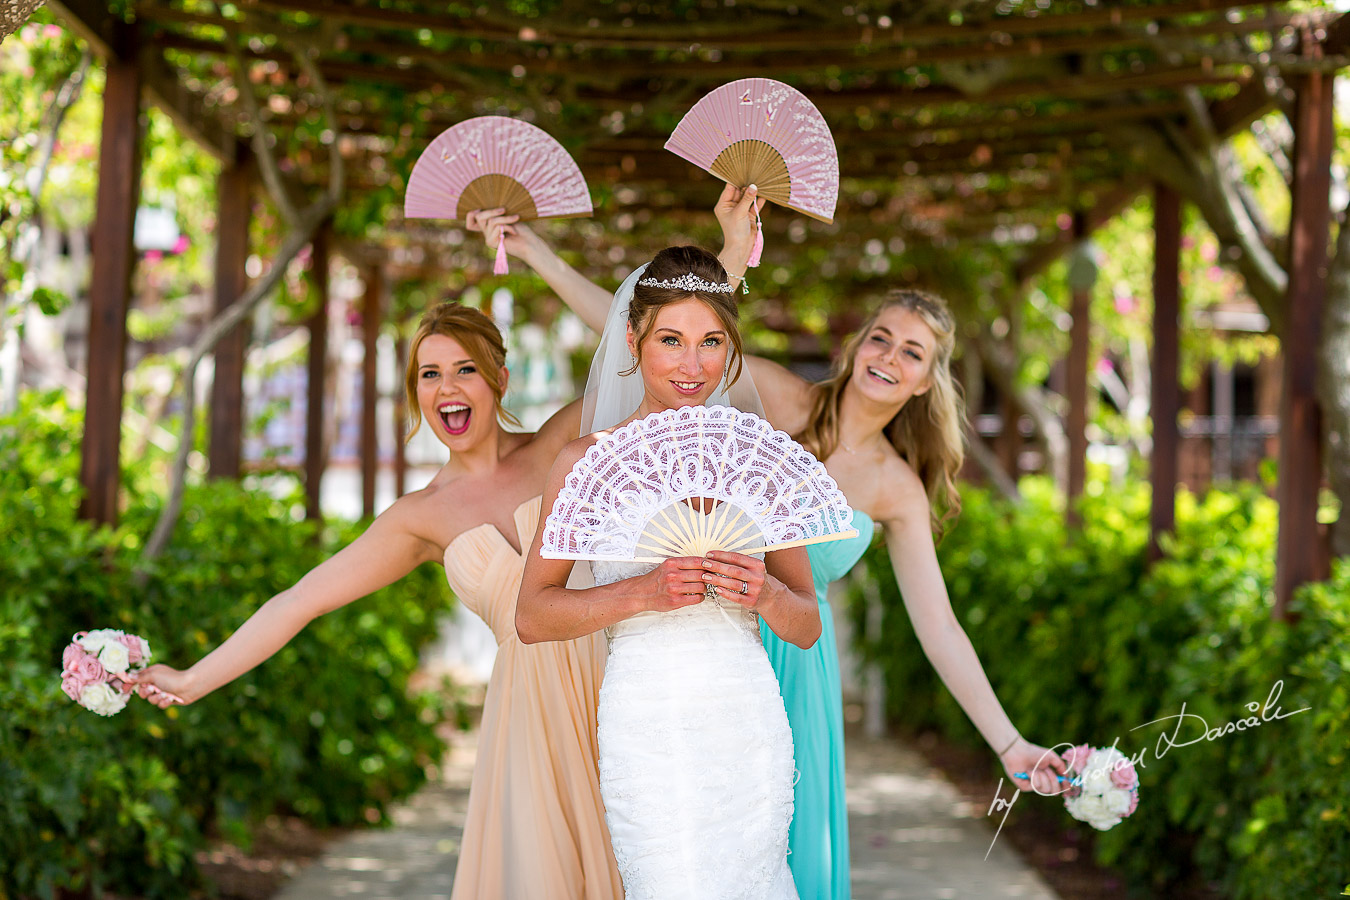 Beautiful bride Alicia and her bridesmaids photographed at Nissi Beach Resort in Ayia Napa, Cyprus by Cristian Dascalu.